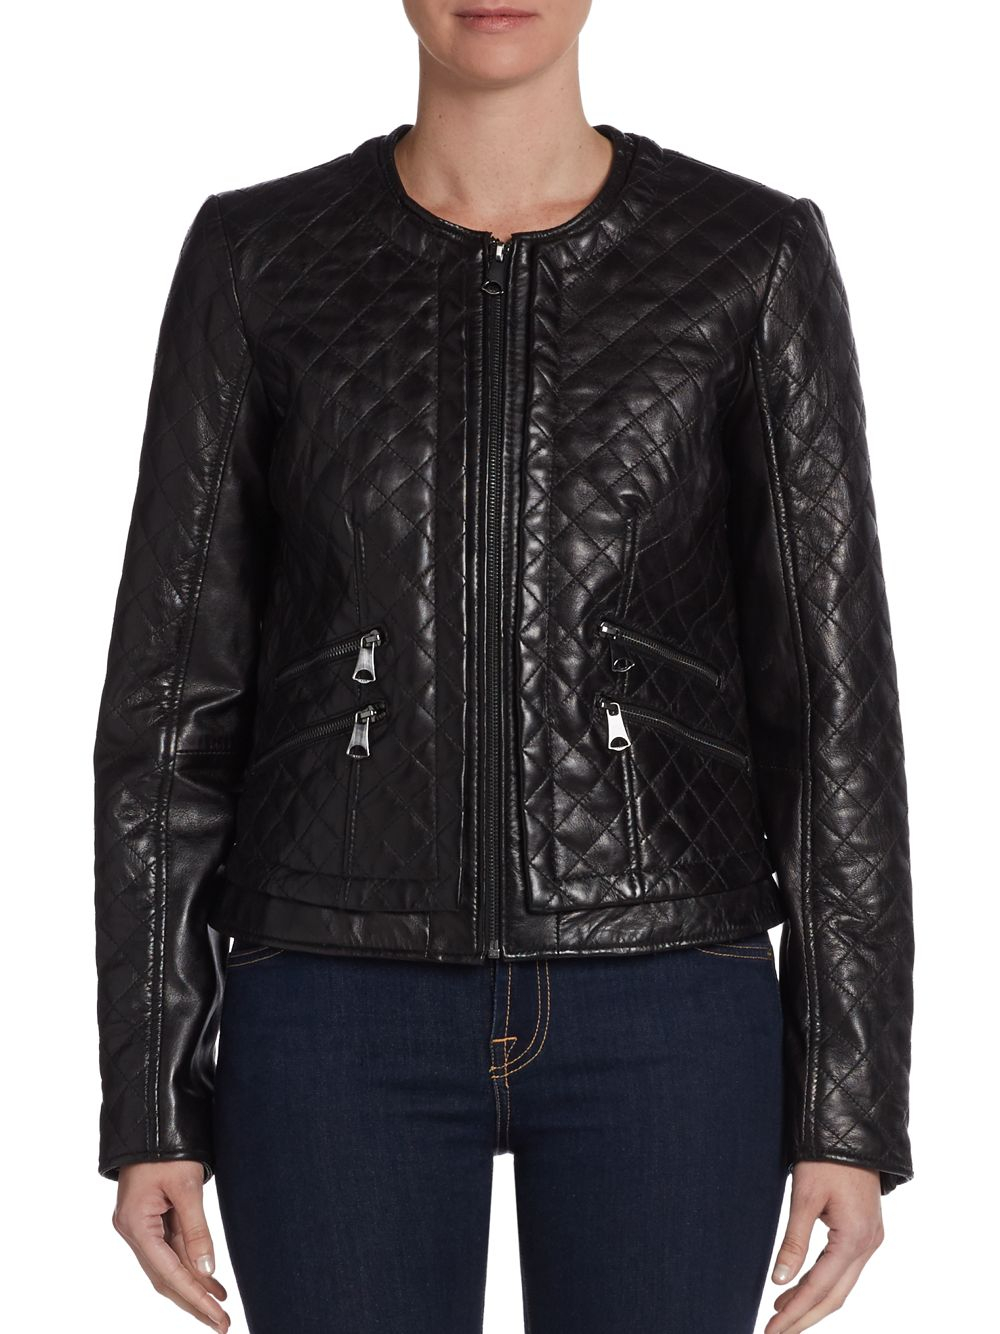 Marc New York Milly Quilted Leather Jacket in Black - Lyst